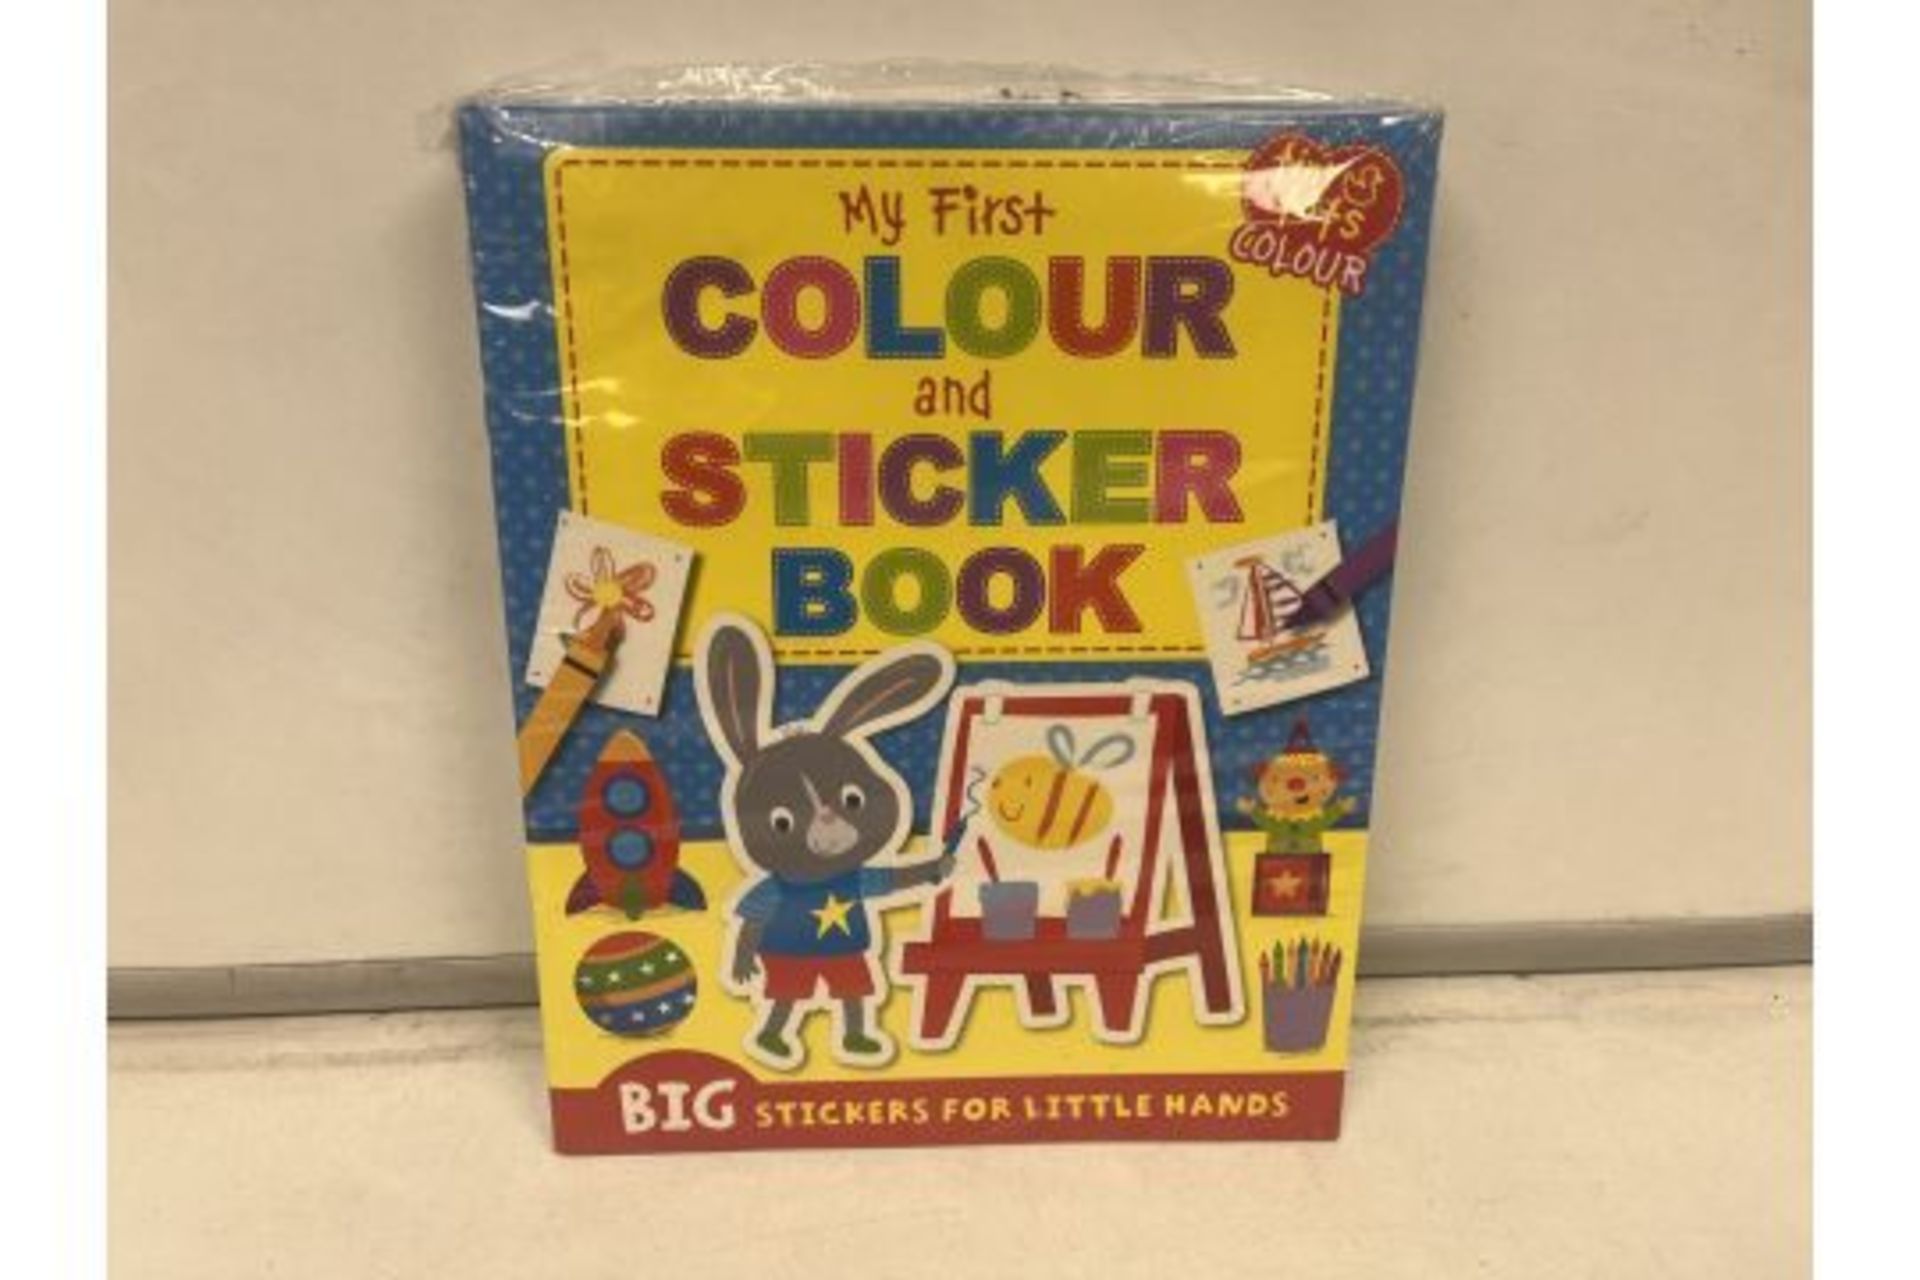 40 X NEW PACKAGED MY FIRST COLOUR & STICKER BOOKS. BIG STICKERS FOR LITTLE HANDS. PRICE MARKED AT £